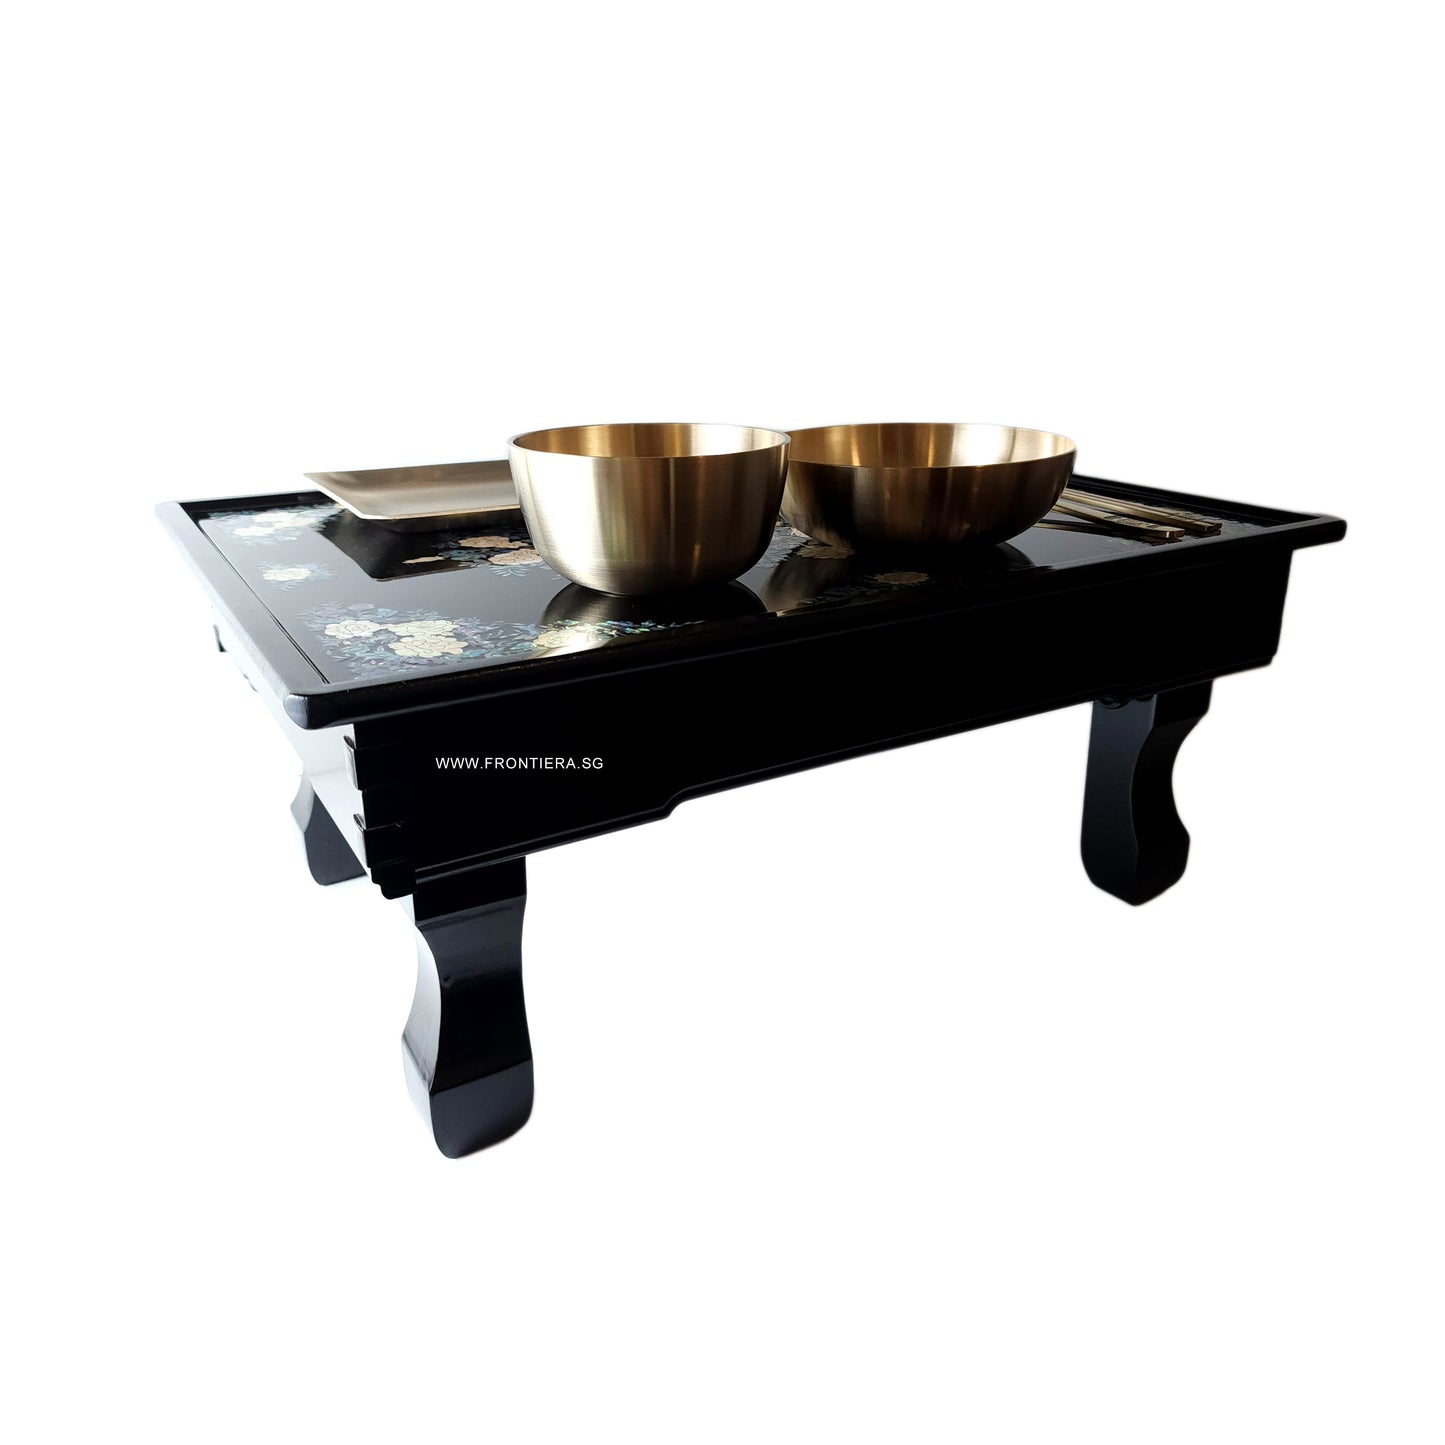 Mother-of-Pearl Inlaid Korean Lacquer Wooden Coffee Table with Foldable feet [Black] 𝟭𝟱% 𝗢𝗙𝗙